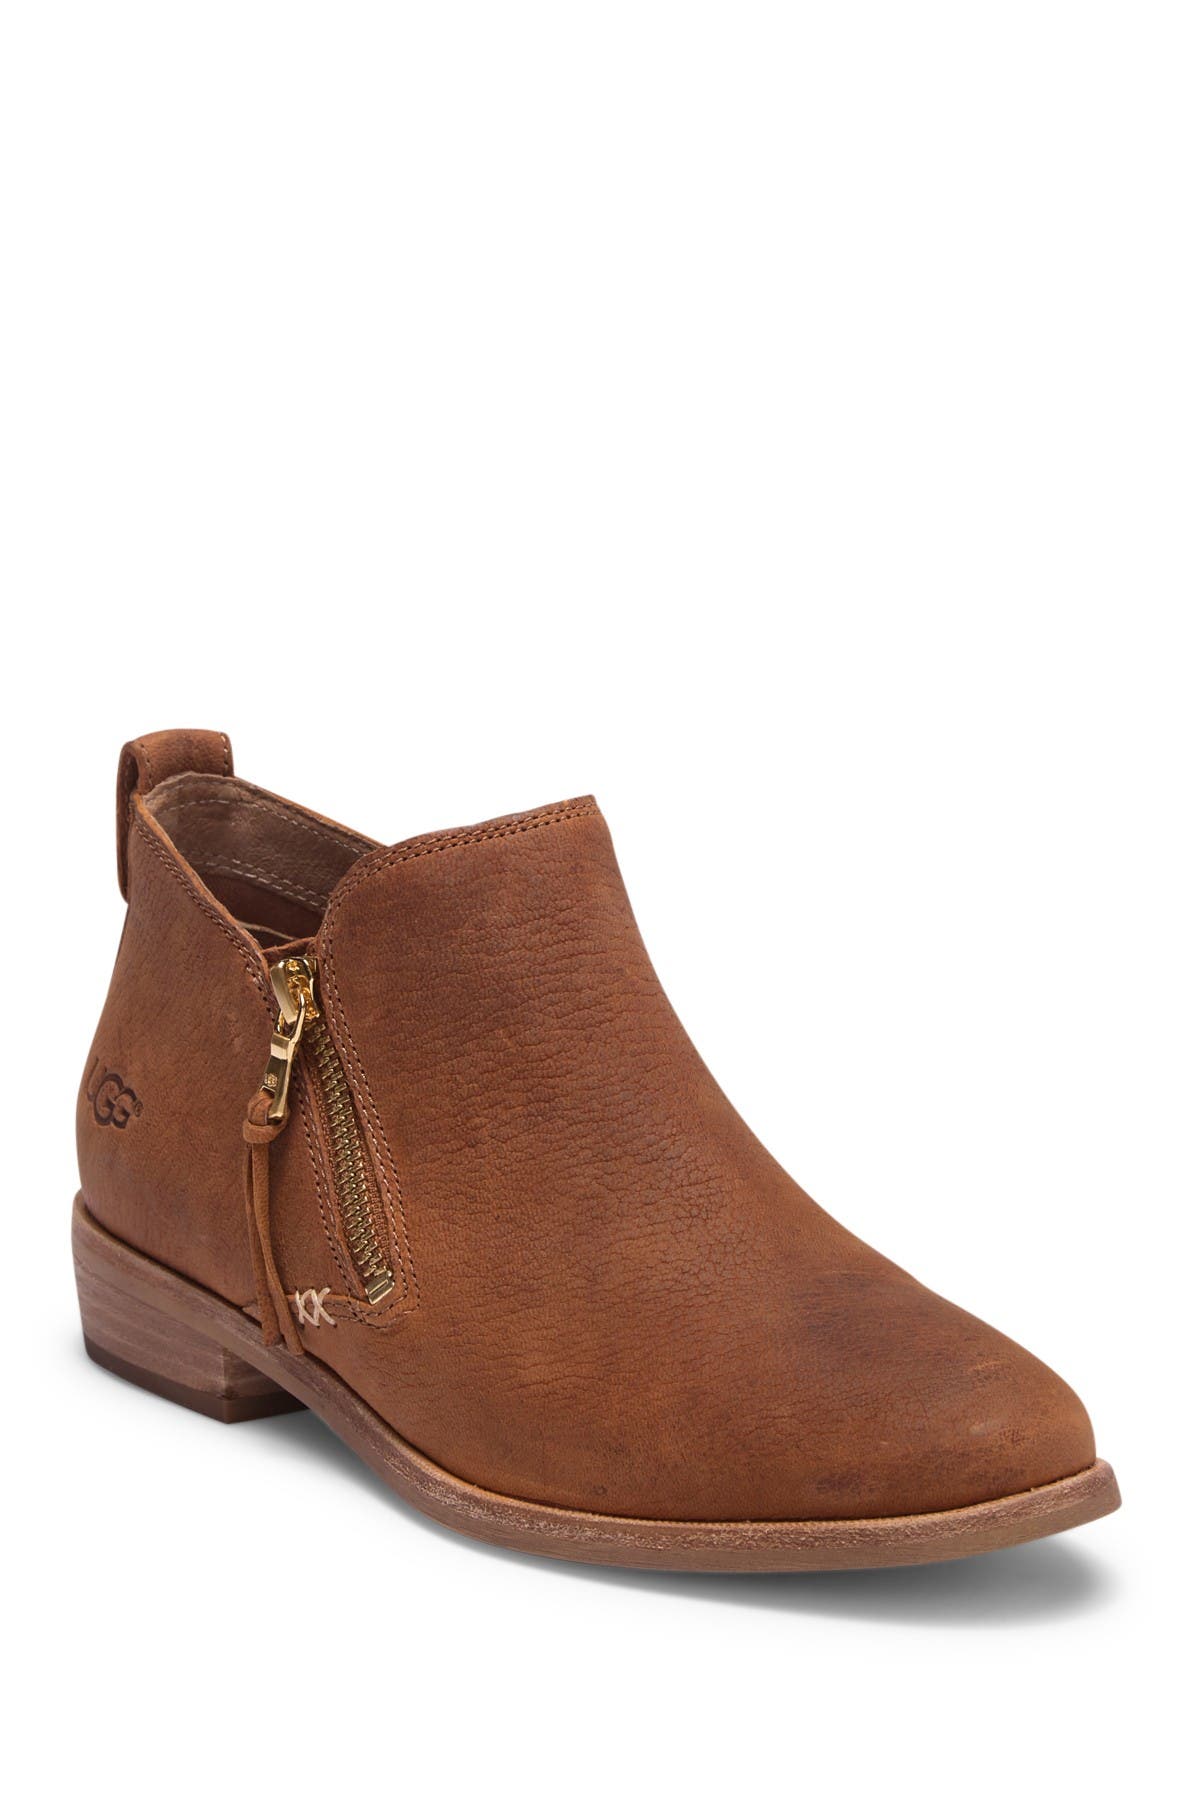 UGG | Glee Leather Ankle Bootie 